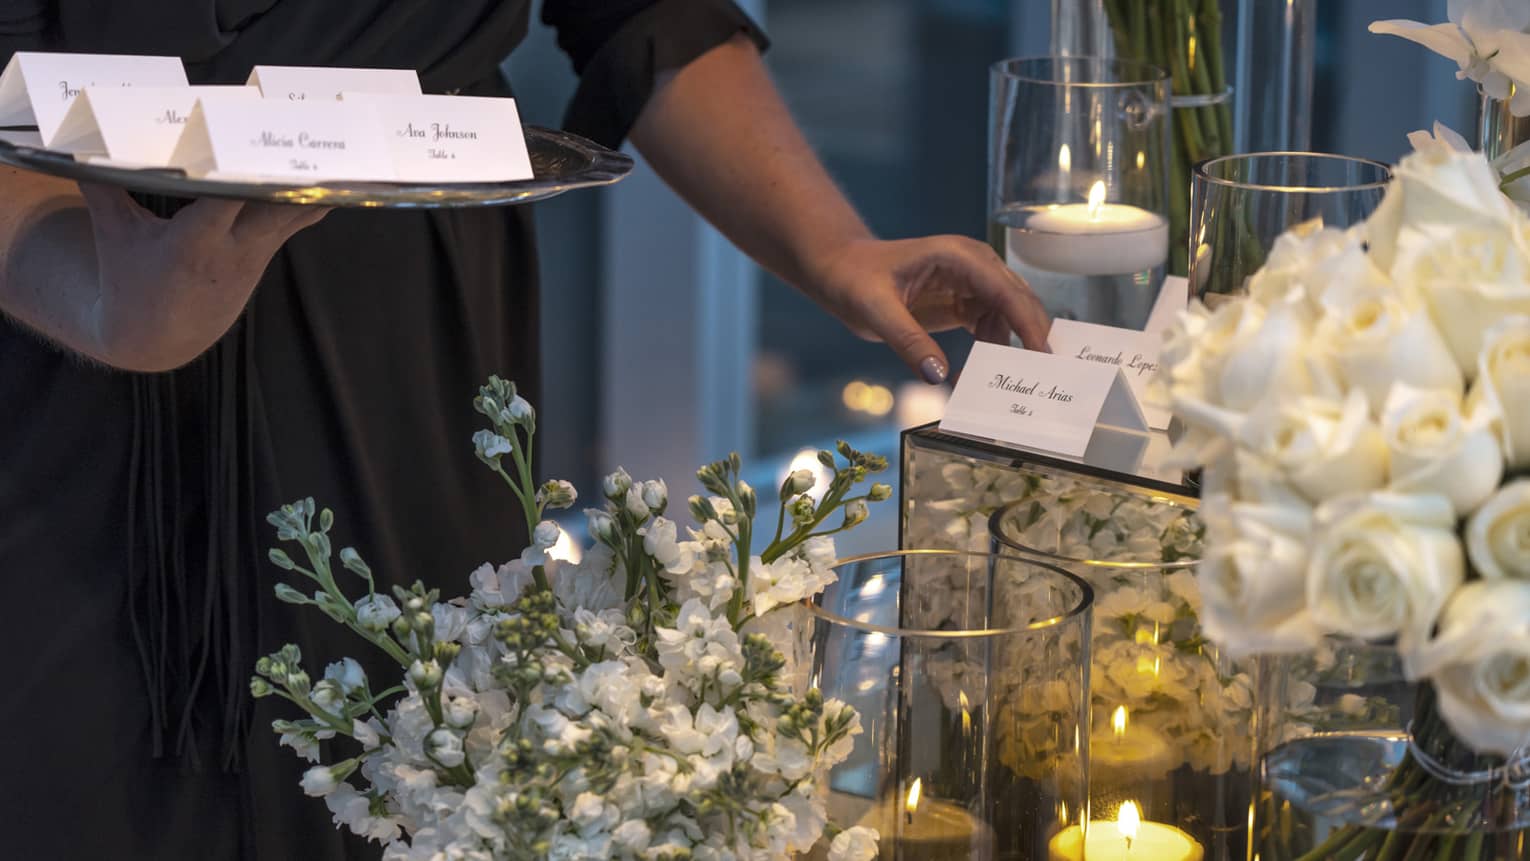 Event staff with tray places name cards on elegant banquet table with white flowers, candles